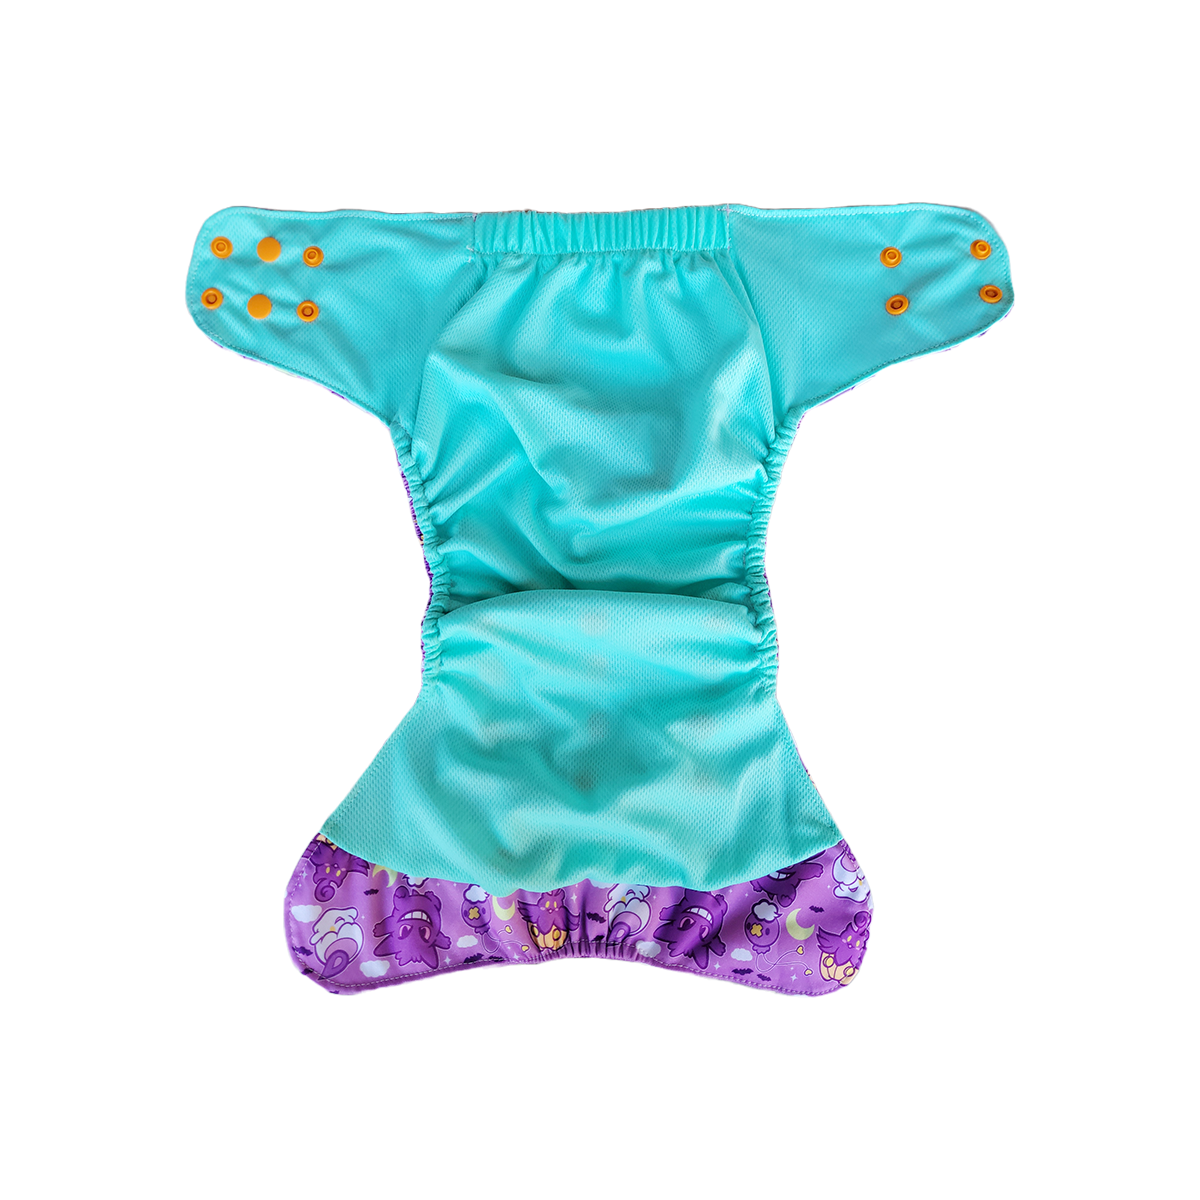 Midsize/ One Size Pocket Diaper - Ghost Type